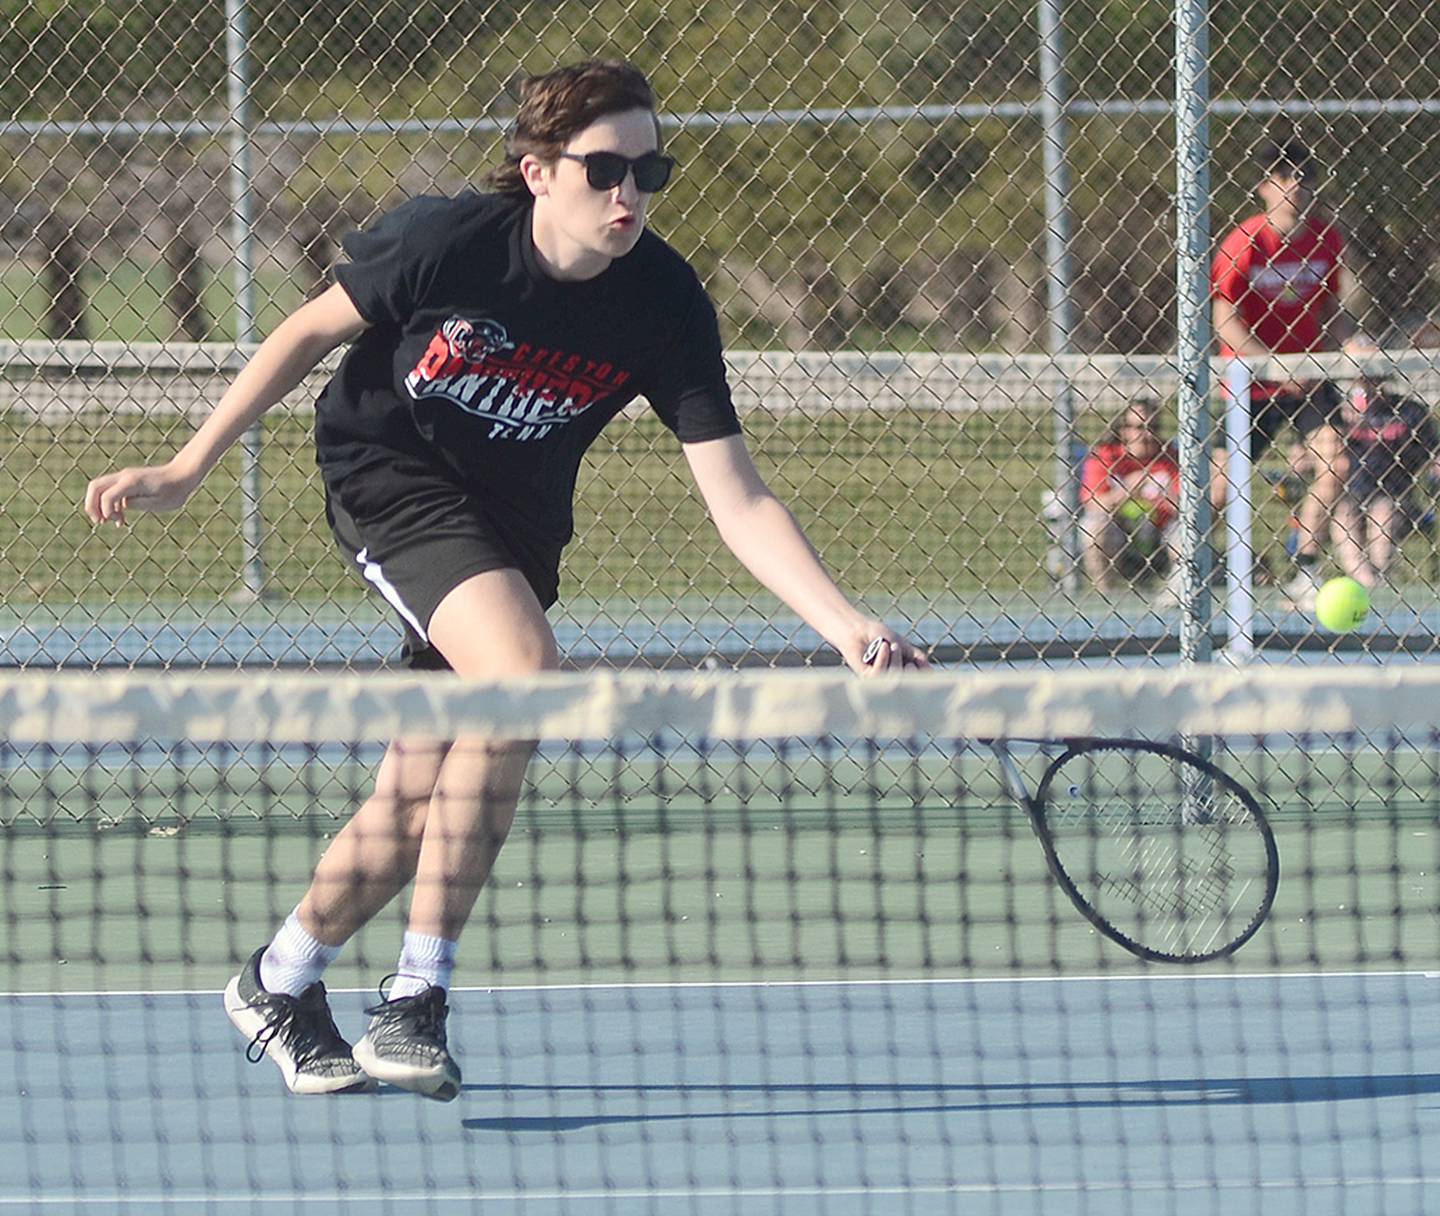 Spencer Brown of Creston reaches for a shot near the net during his 8-6 win at No. 6 singles Monday against Chariton.